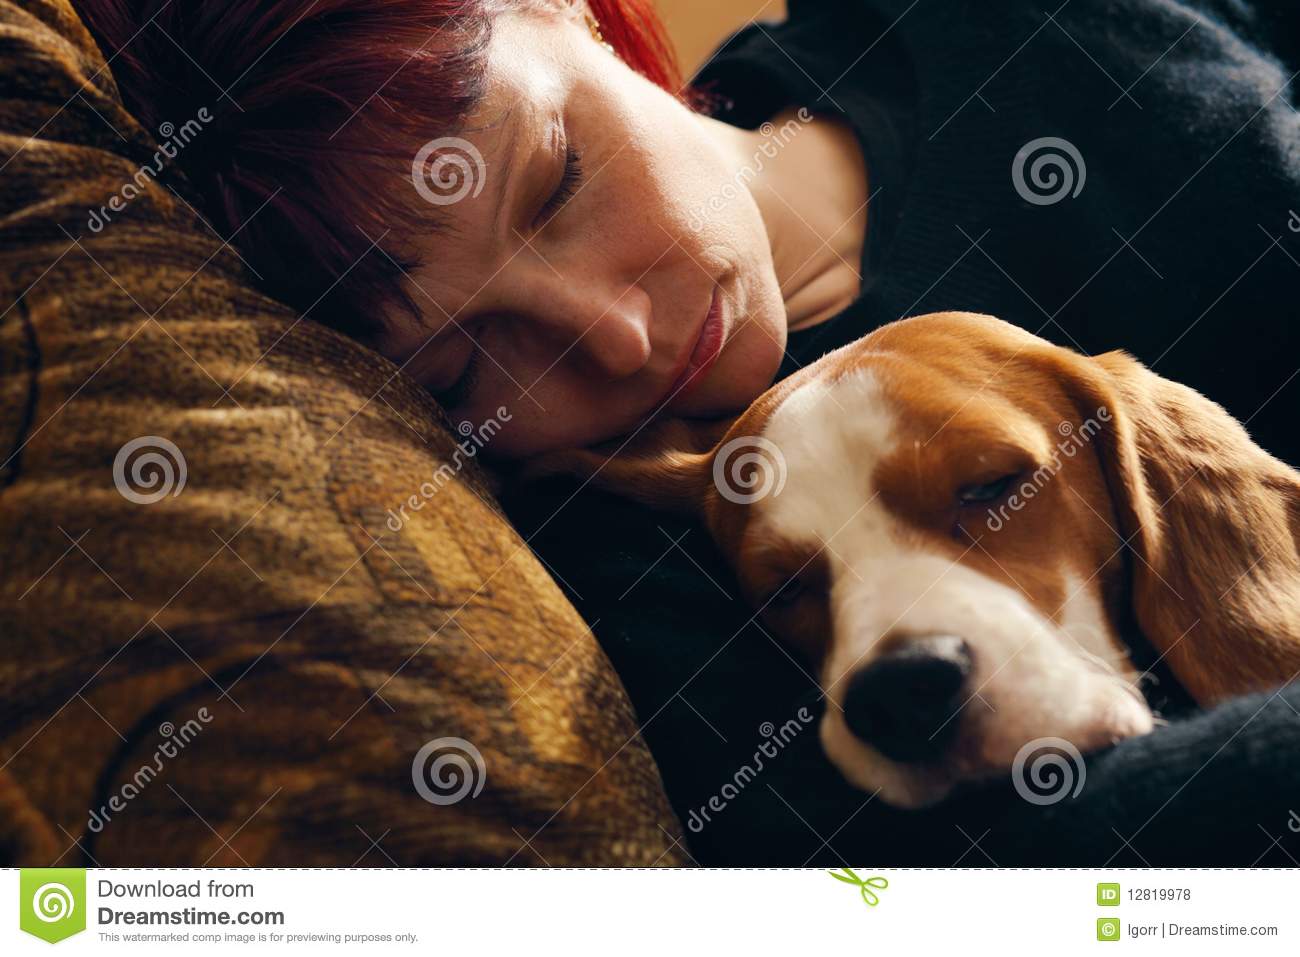 The Woman Who Has Fallen Asleep With The Puppyfocus On A Woman